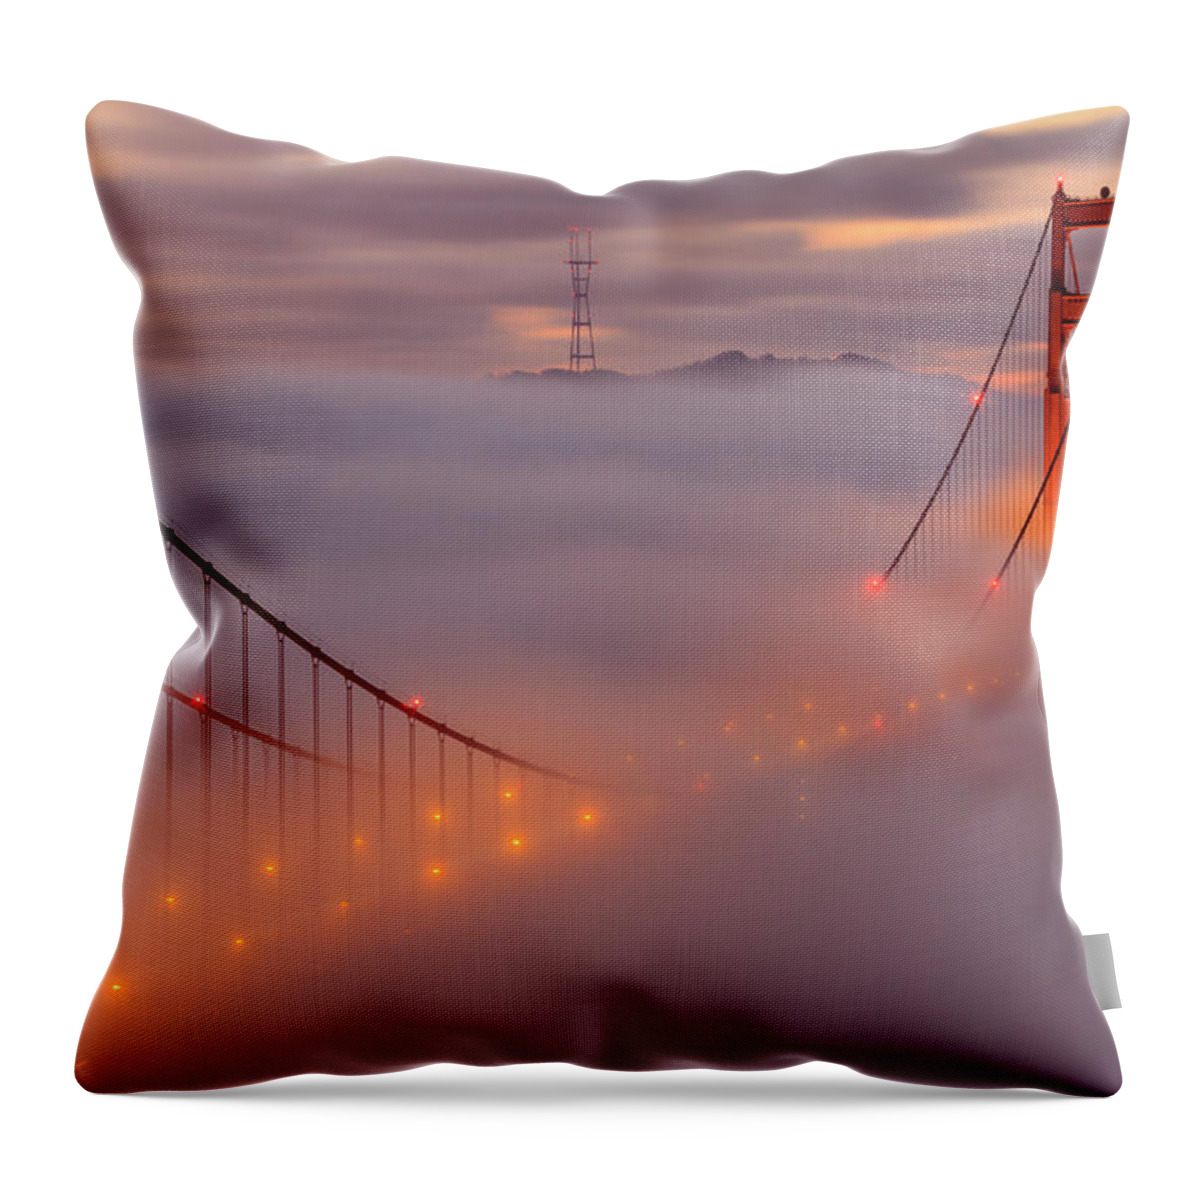 #faatoppicks Throw Pillow featuring the photograph The Dance Above The Bridge by Erick Castellon